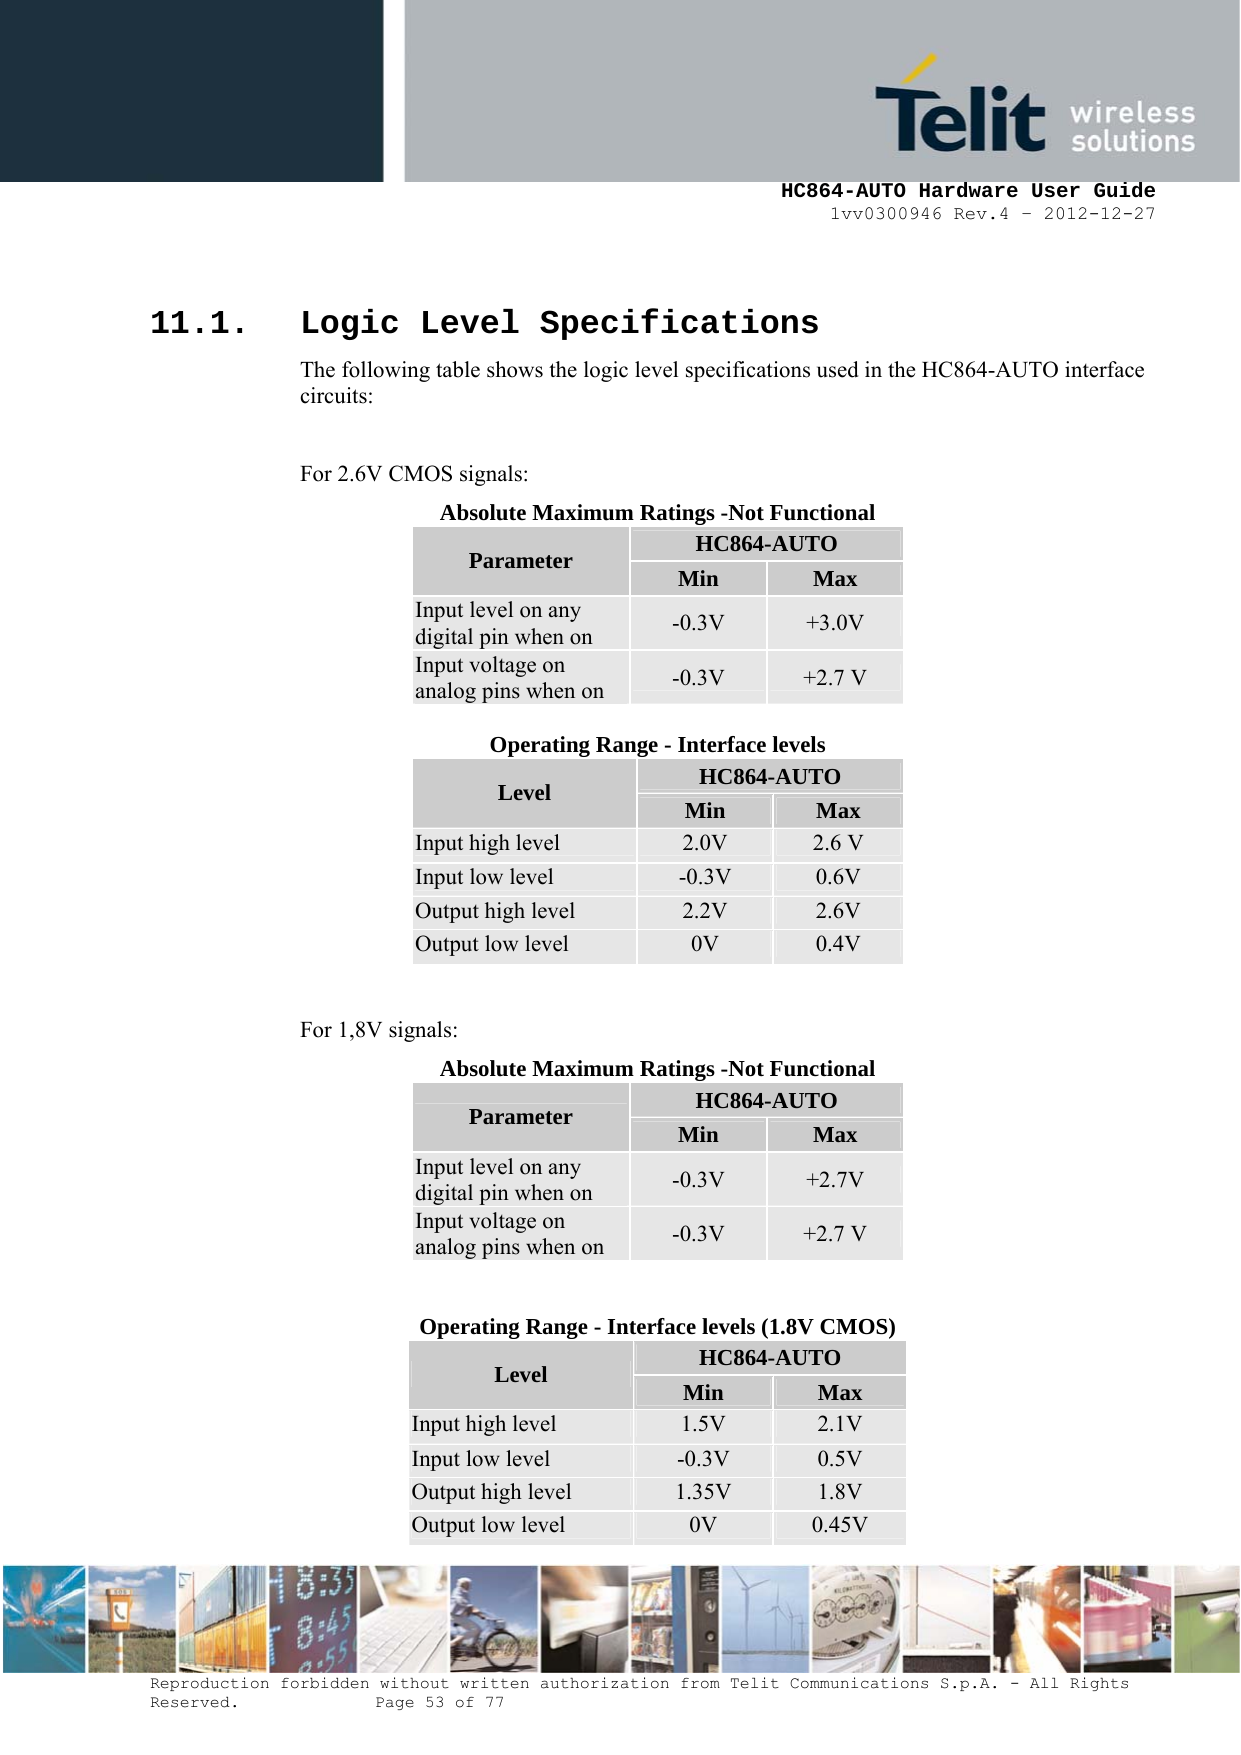     HC864-AUTO Hardware User Guide 1vv0300946 Rev.4 – 2012-12-27 Reproduction forbidden without written authorization from Telit Communications S.p.A. - All Rights Reserved.    Page 53 of 77   11.1. Logic Level Specifications The following table shows the logic level specifications used in the HC864-AUTO interface circuits:  For 2.6V CMOS signals: Absolute Maximum Ratings -Not Functional HC864-AUTO Parameter  Min  Max Input level on any digital pin when on  -0.3V  +3.0V Input voltage on analog pins when on  -0.3V  +2.7 V  Operating Range - Interface levels HC864-AUTO Level  Min  Max Input high level  2.0V  2.6 V Input low level  -0.3V  0.6V Output high level  2.2V  2.6V Output low level  0V  0.4V  For 1,8V signals: Absolute Maximum Ratings -Not Functional HC864-AUTO Parameter  Min  Max Input level on any digital pin when on  -0.3V  +2.7V Input voltage on analog pins when on  -0.3V  +2.7 V  Operating Range - Interface levels (1.8V CMOS) HC864-AUTO Level  Min  Max Input high level  1.5V  2.1V Input low level  -0.3V  0.5V Output high level  1.35V  1.8V Output low level  0V  0.45V 